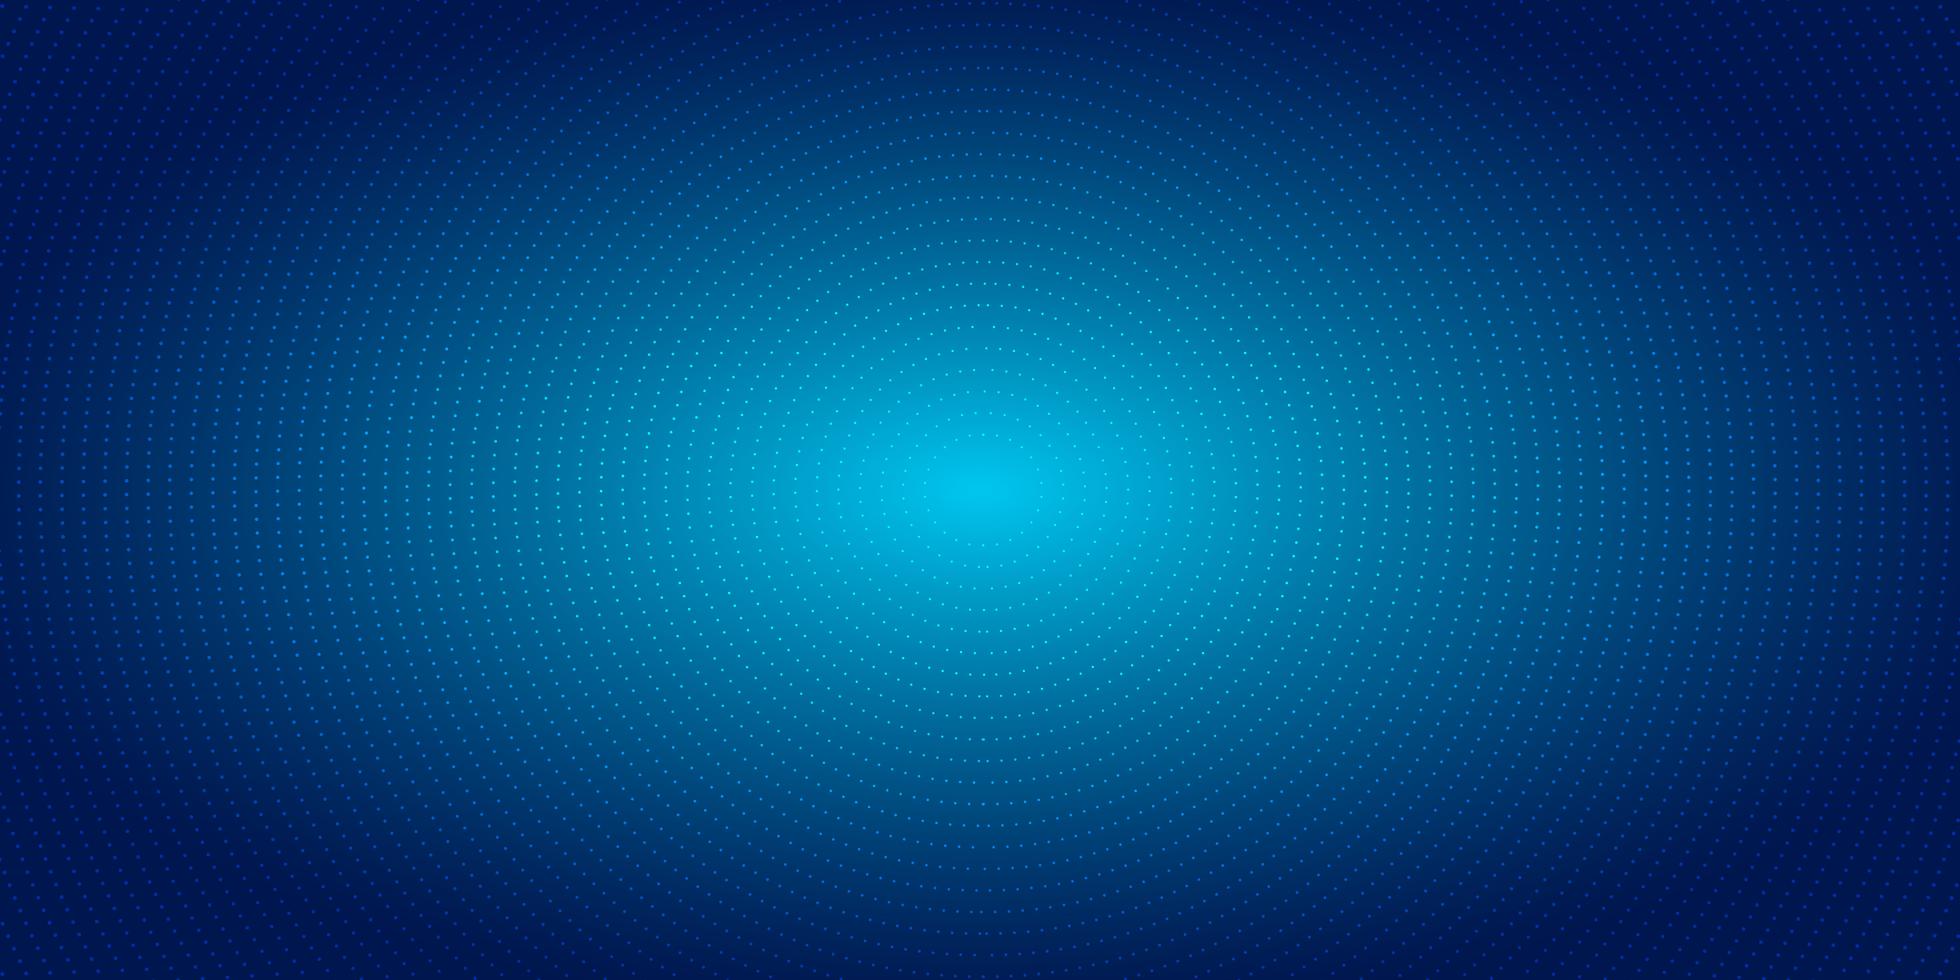 Abstract Radial Dots Pattern Halftone On Blue Gradient Background